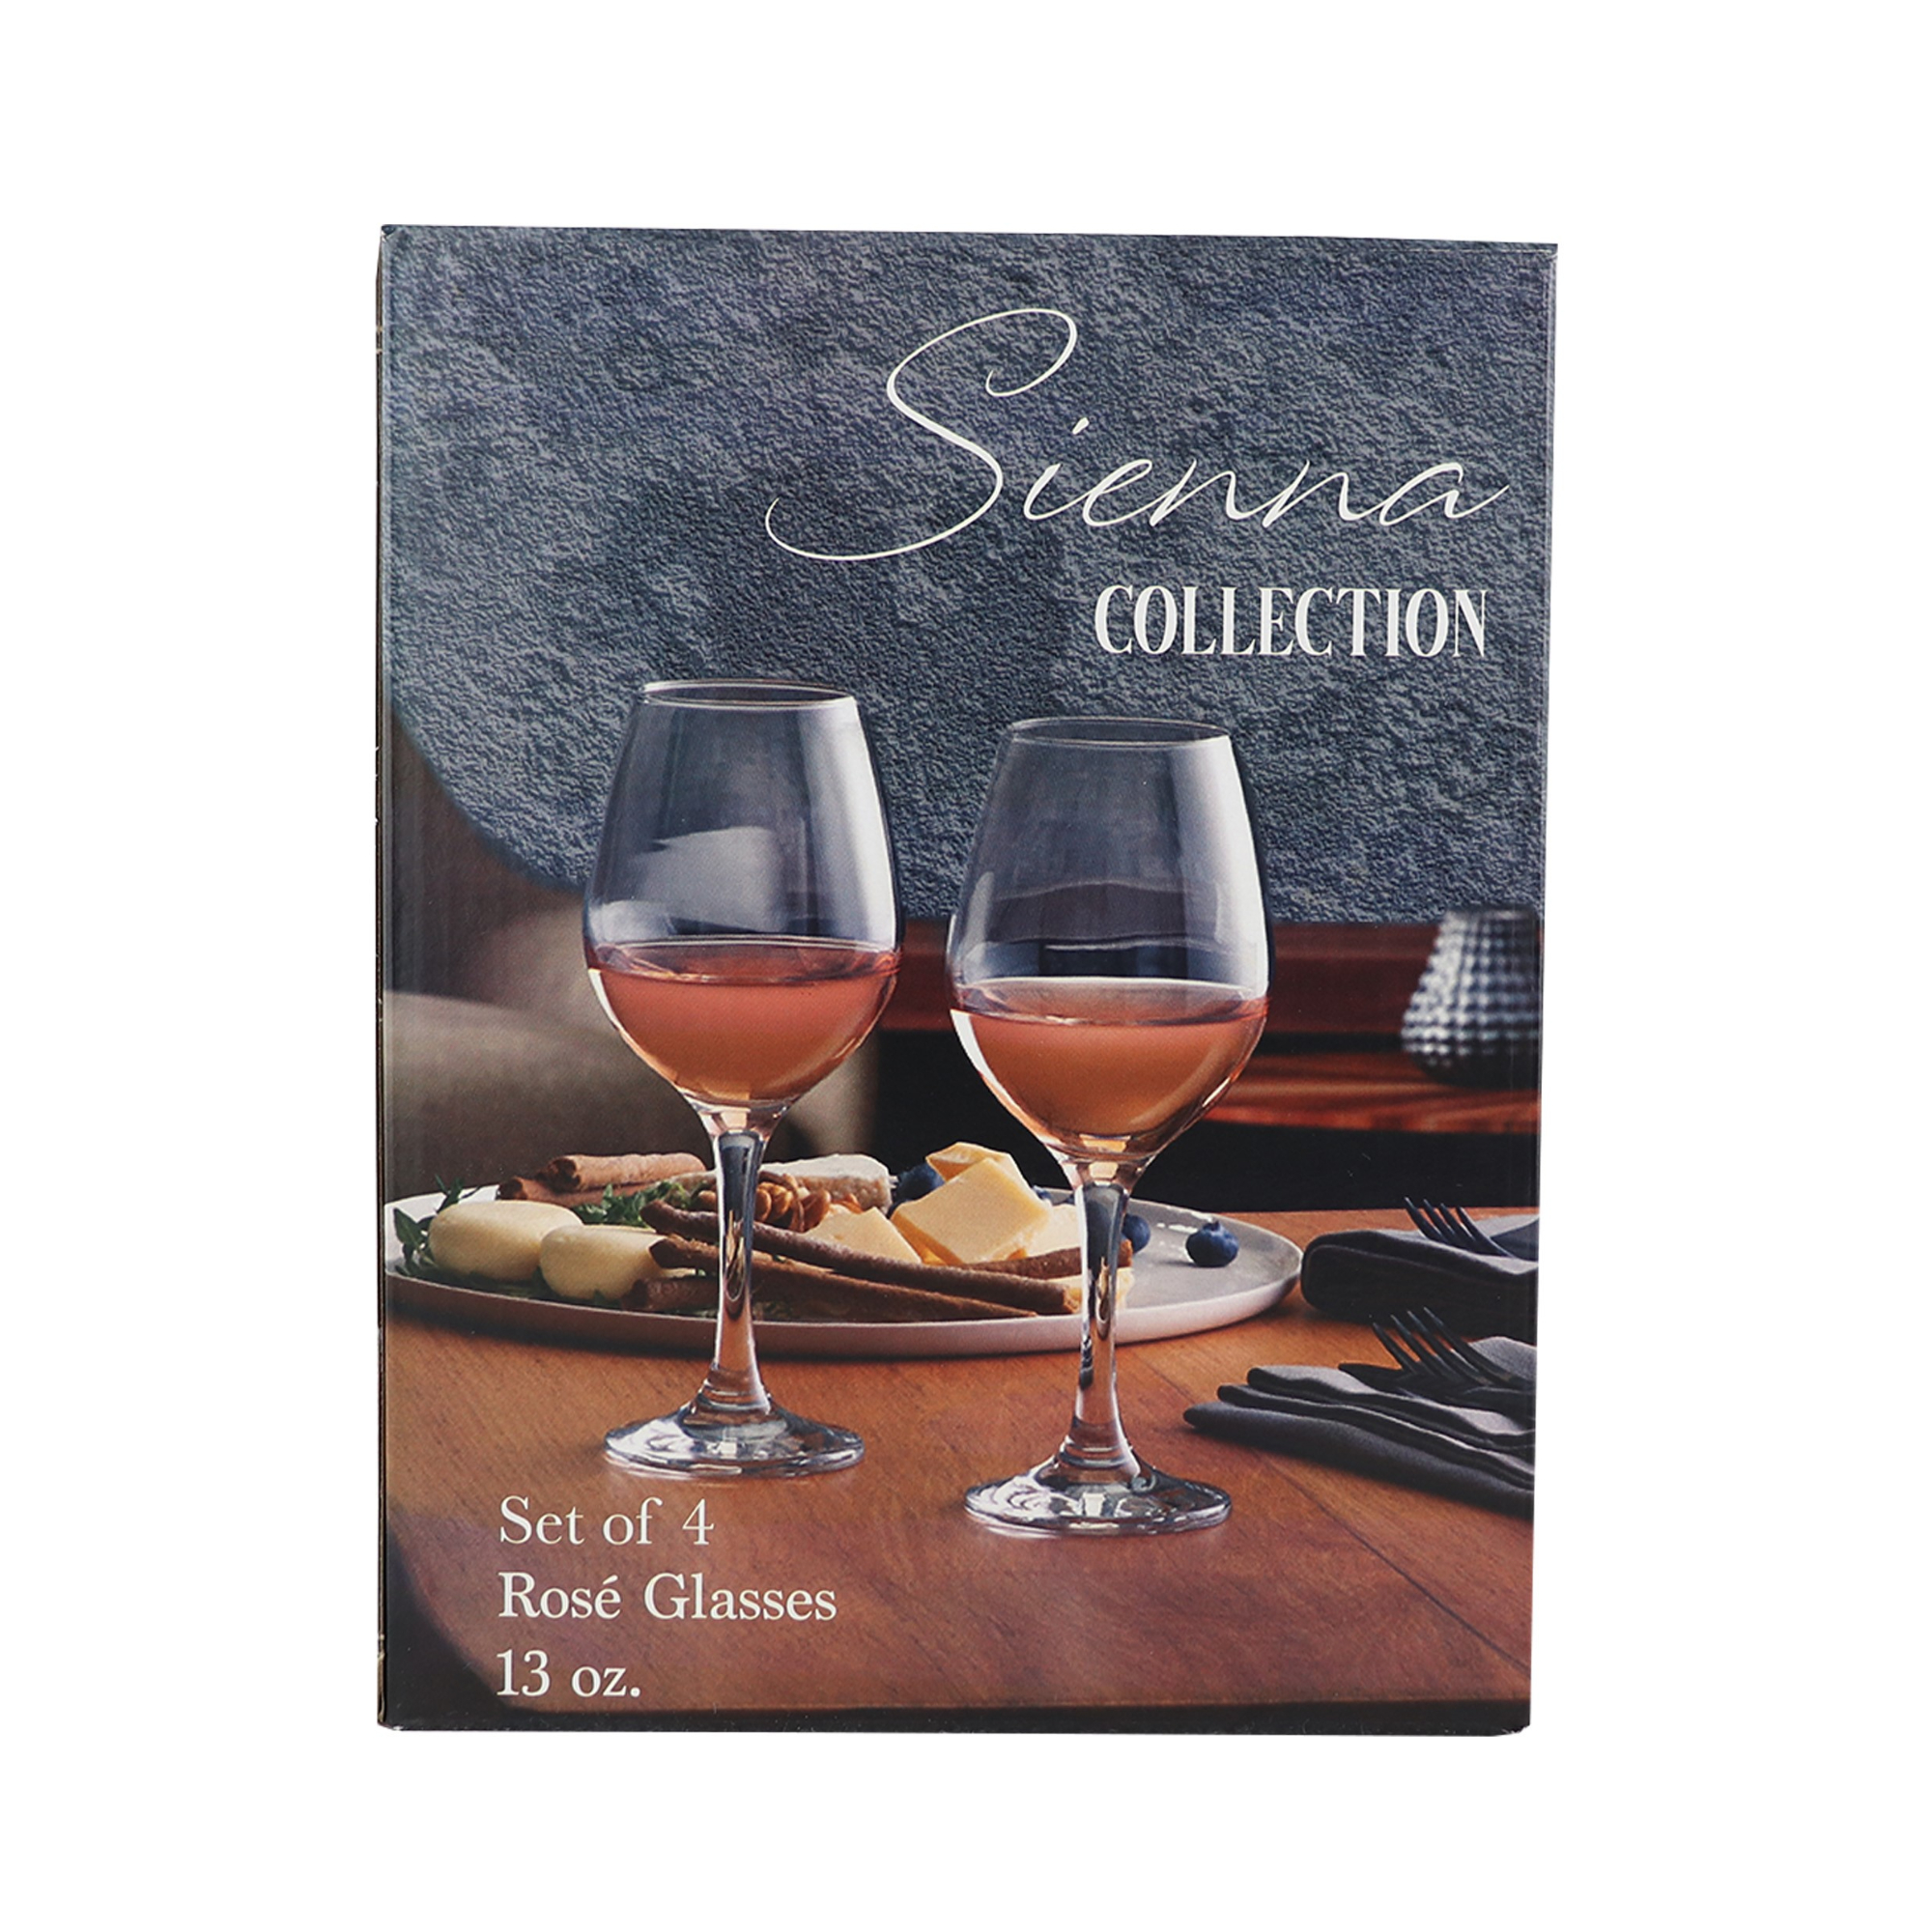 Sienna Collection Rose Glasses (384g x 4pcs)